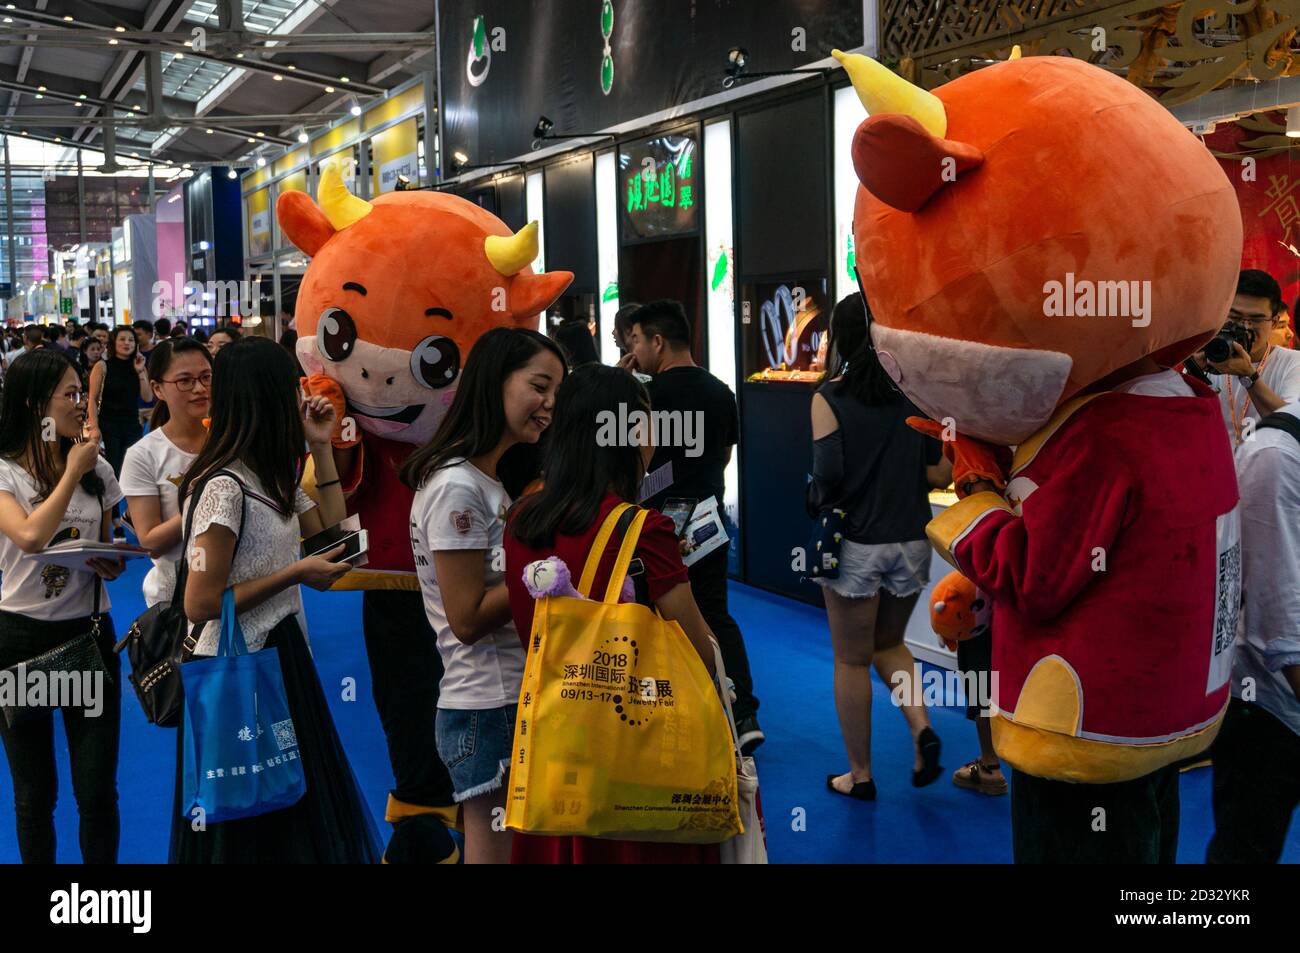 Brand mascot promoting sales in China Stock Photo